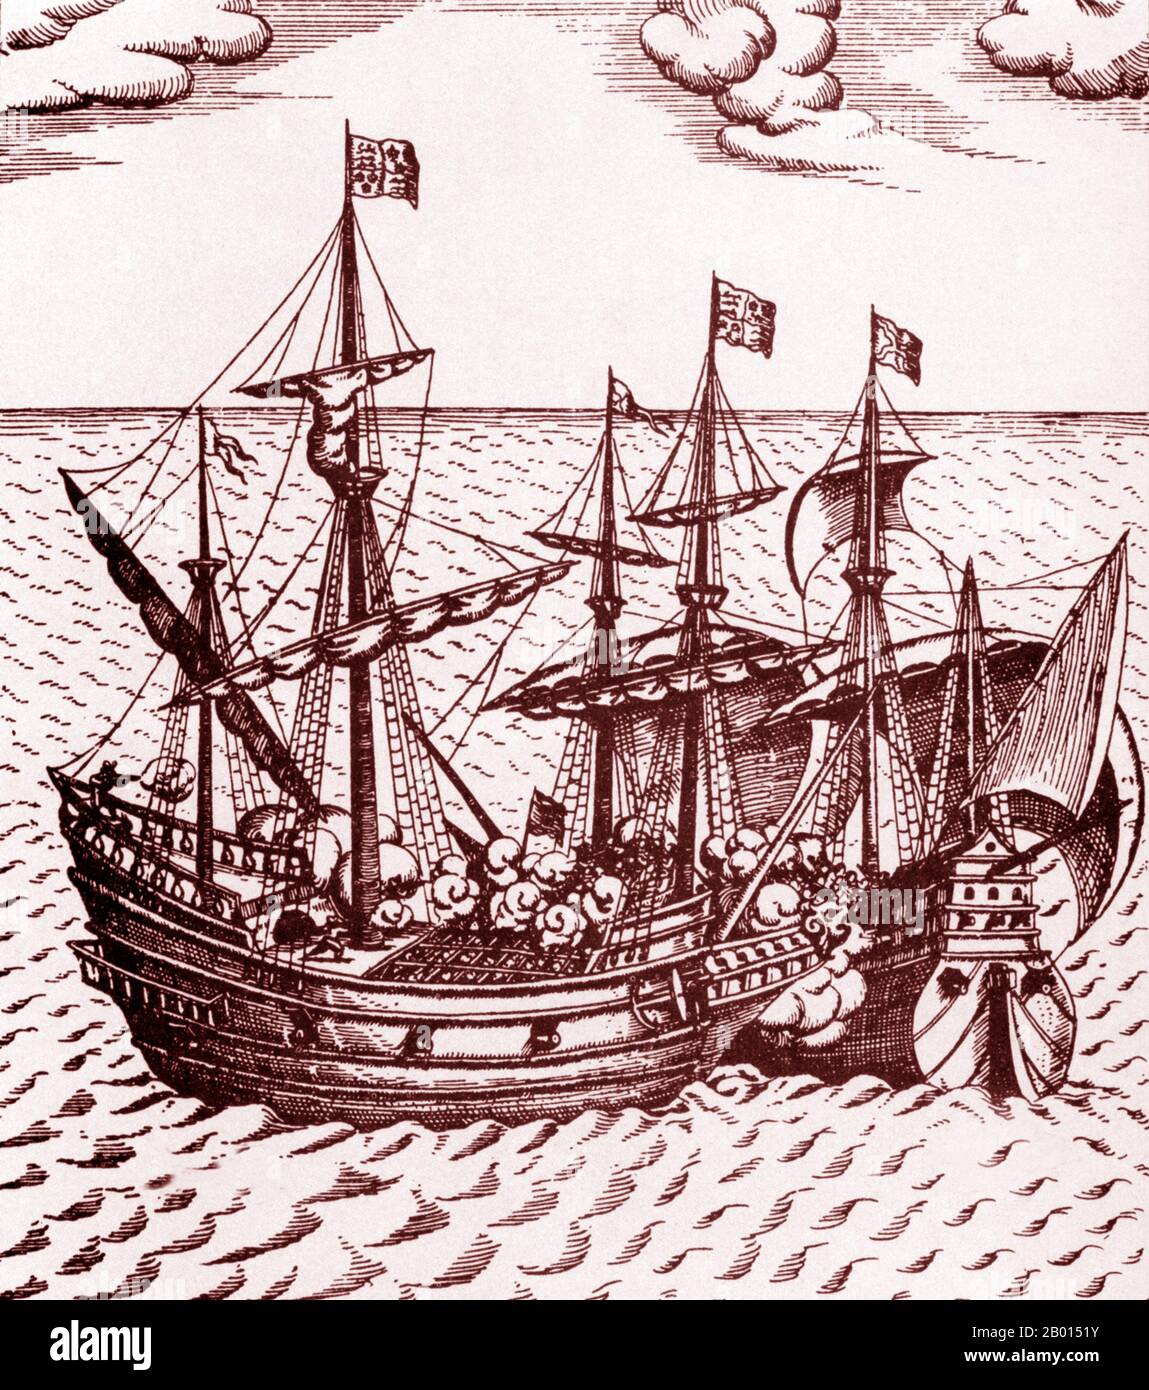 England: 'The Capture of the Cacafuego, the Spanish Treasure-Ship, by Sir Francis Drake'. Engraving by Friedrich van Hulsen (1580-1665), 1626.  Vice Admiral Sir Francis Drake (1540-1596) was an English sea captain, privateer, circumnavigator, slaver, a renowned pirate, and a politician of the Elizabethan era. Elizabeth I of England awarded Drake a knighthood in 1581. He was second-in-command of the English fleet against the Spanish Armada in 1588, subordinate only to Charles Howard and the Queen herself. He died of dysentery in January 1596 after unsuccessfully attacking San Juan, Puerto Rico. Stock Photo